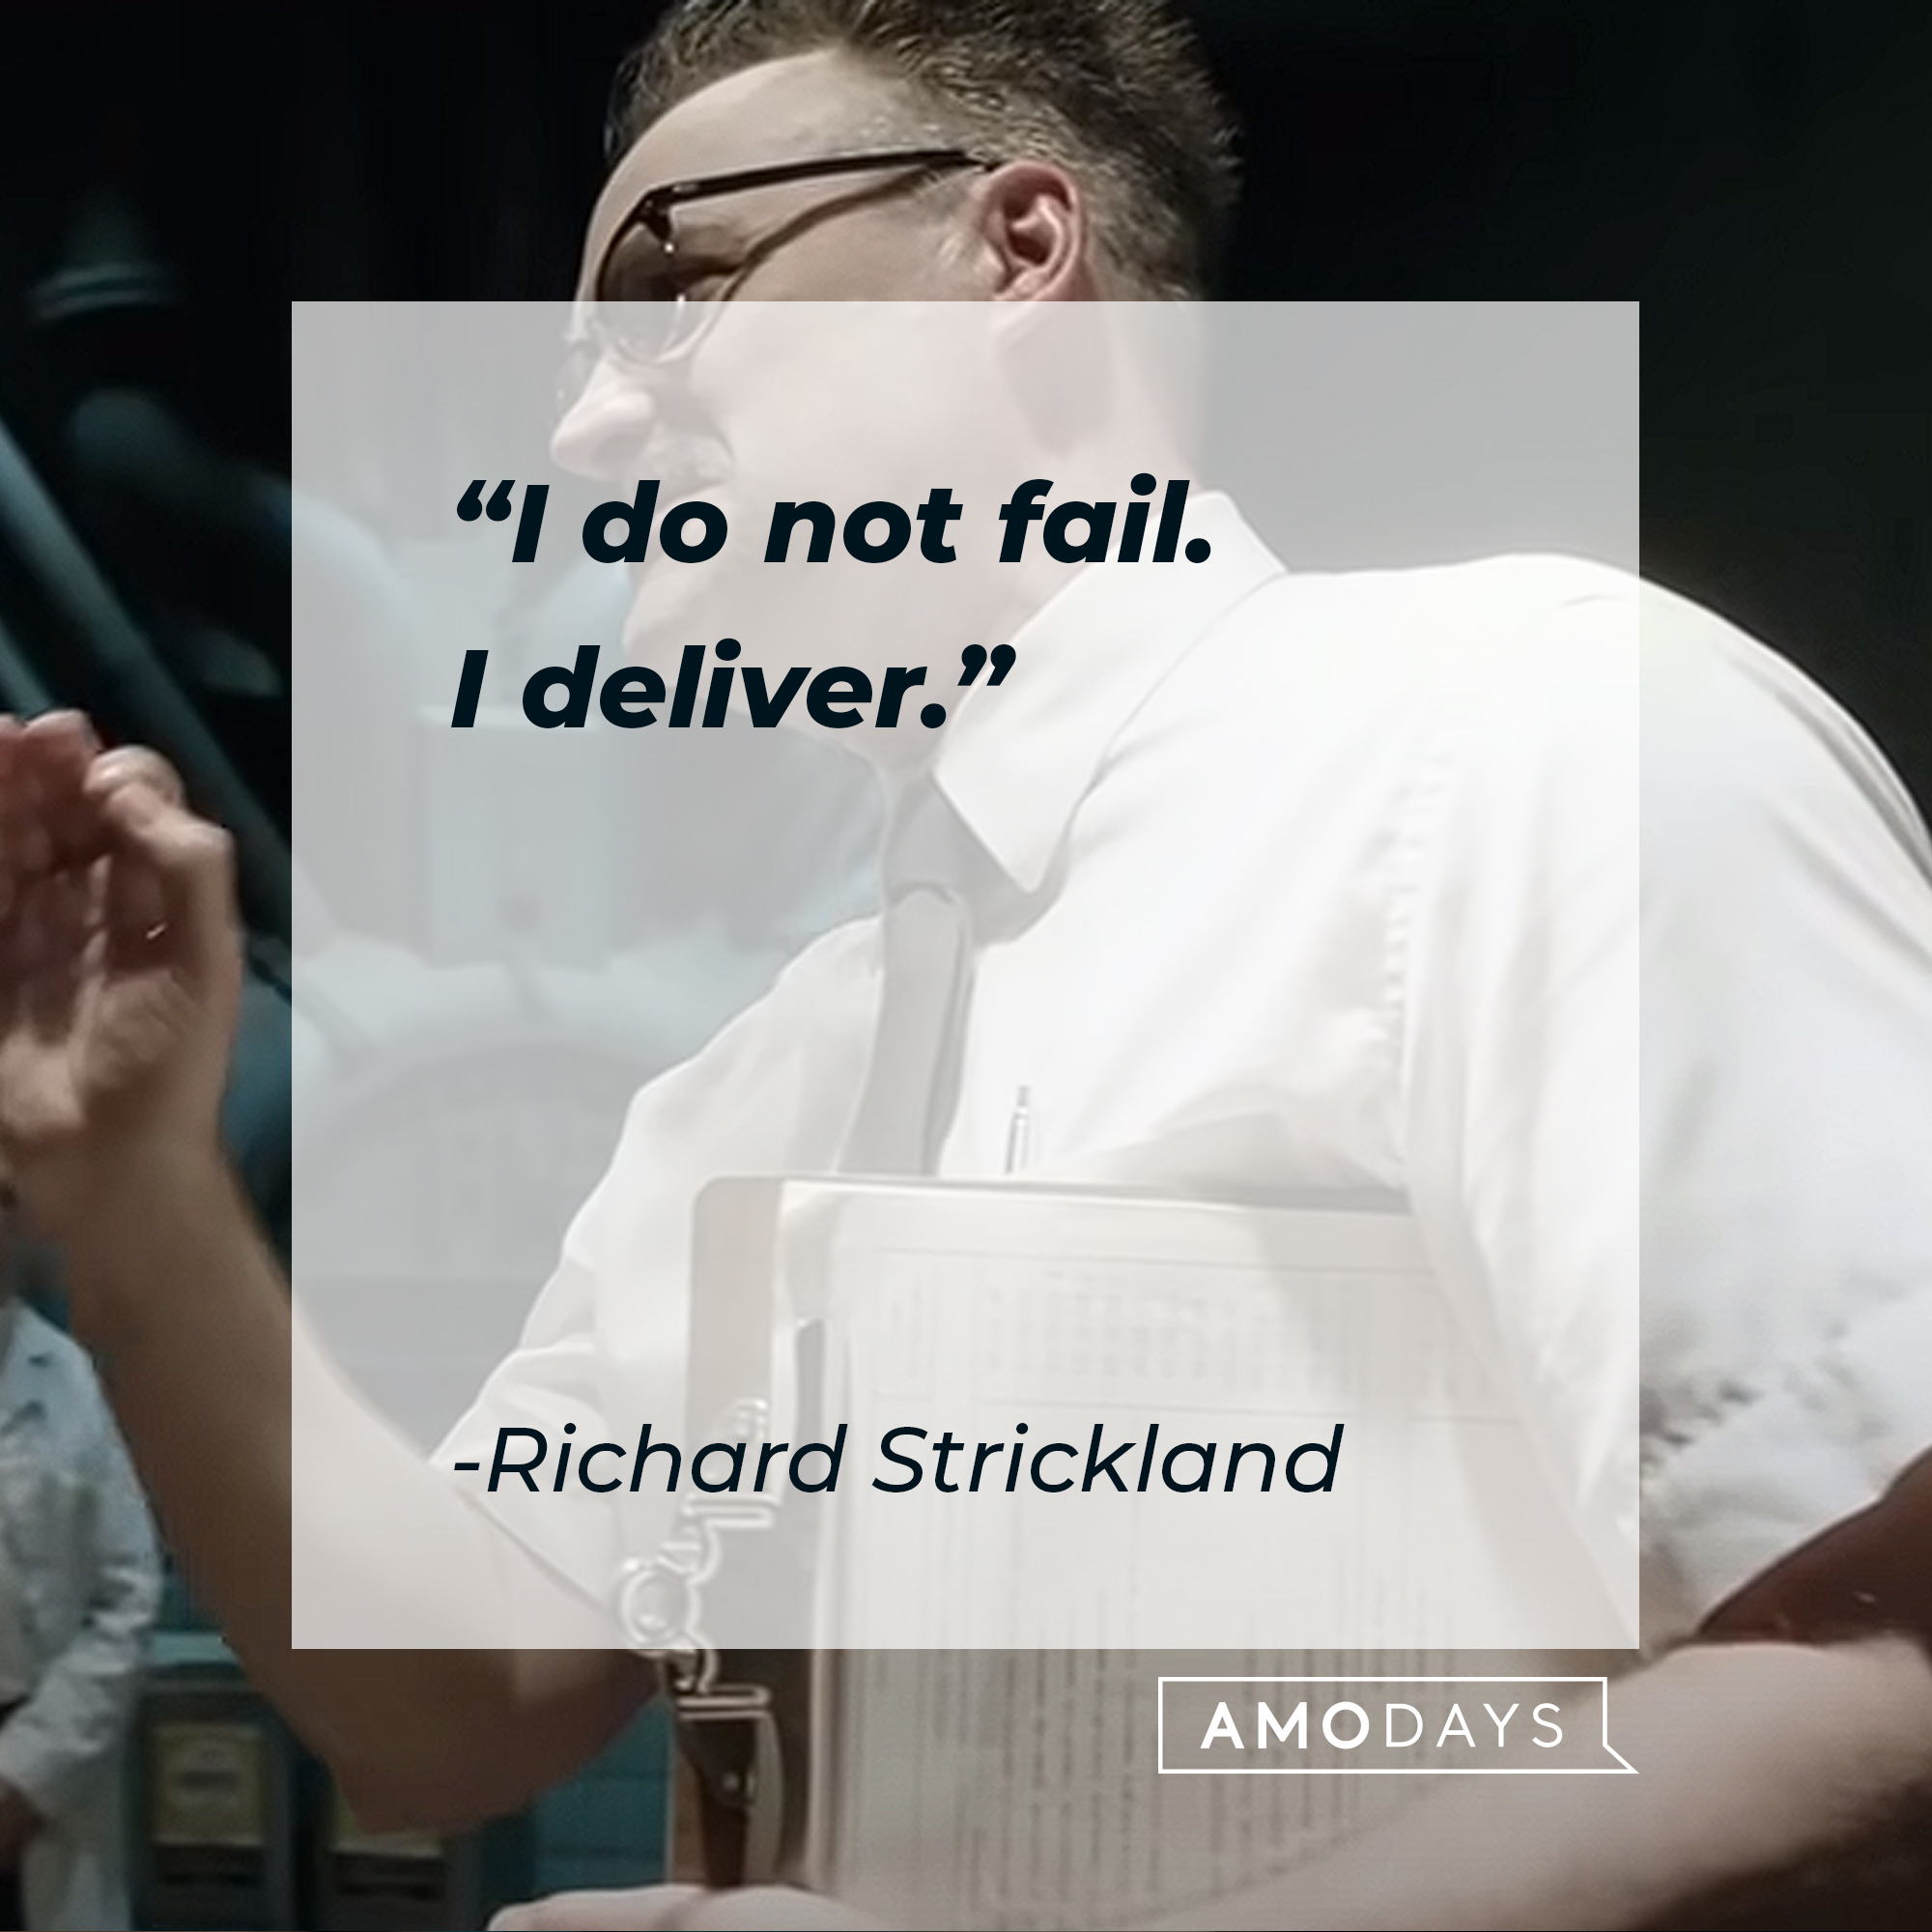 Richard Strickland's quote : "I do not fail. I deliver.” | Source:youtube.com/searchlightpictures